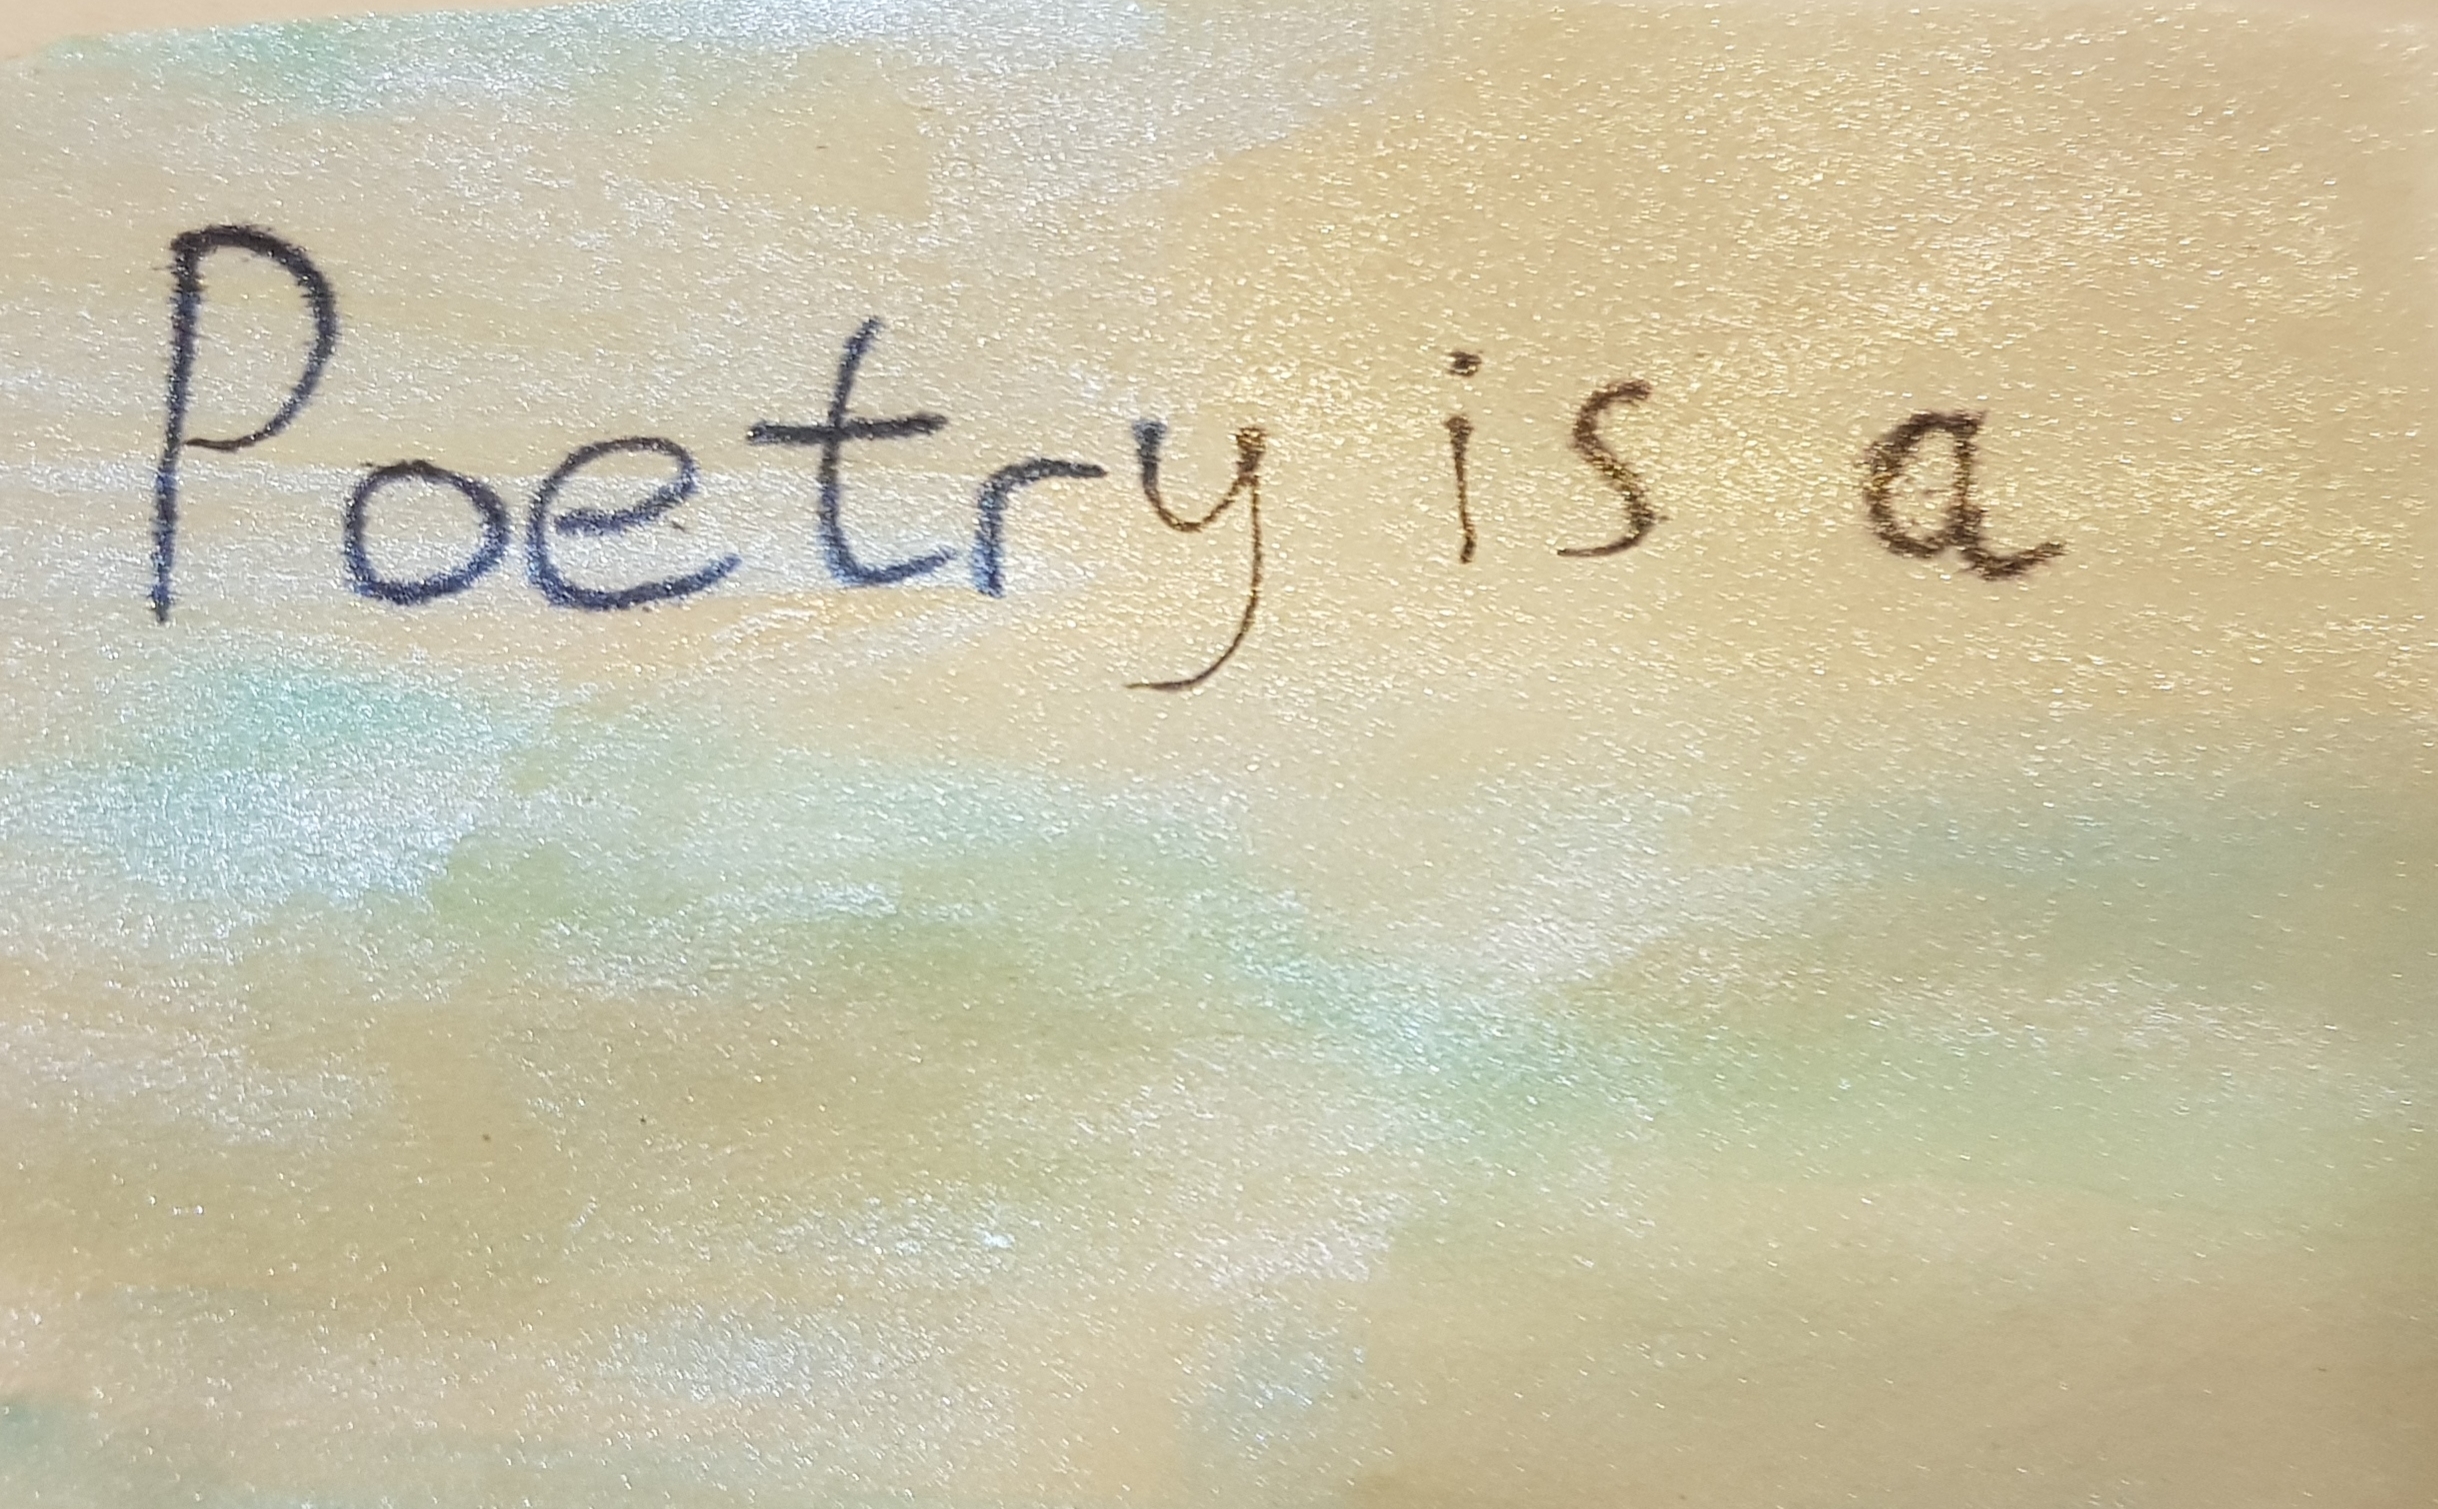 poetry is a